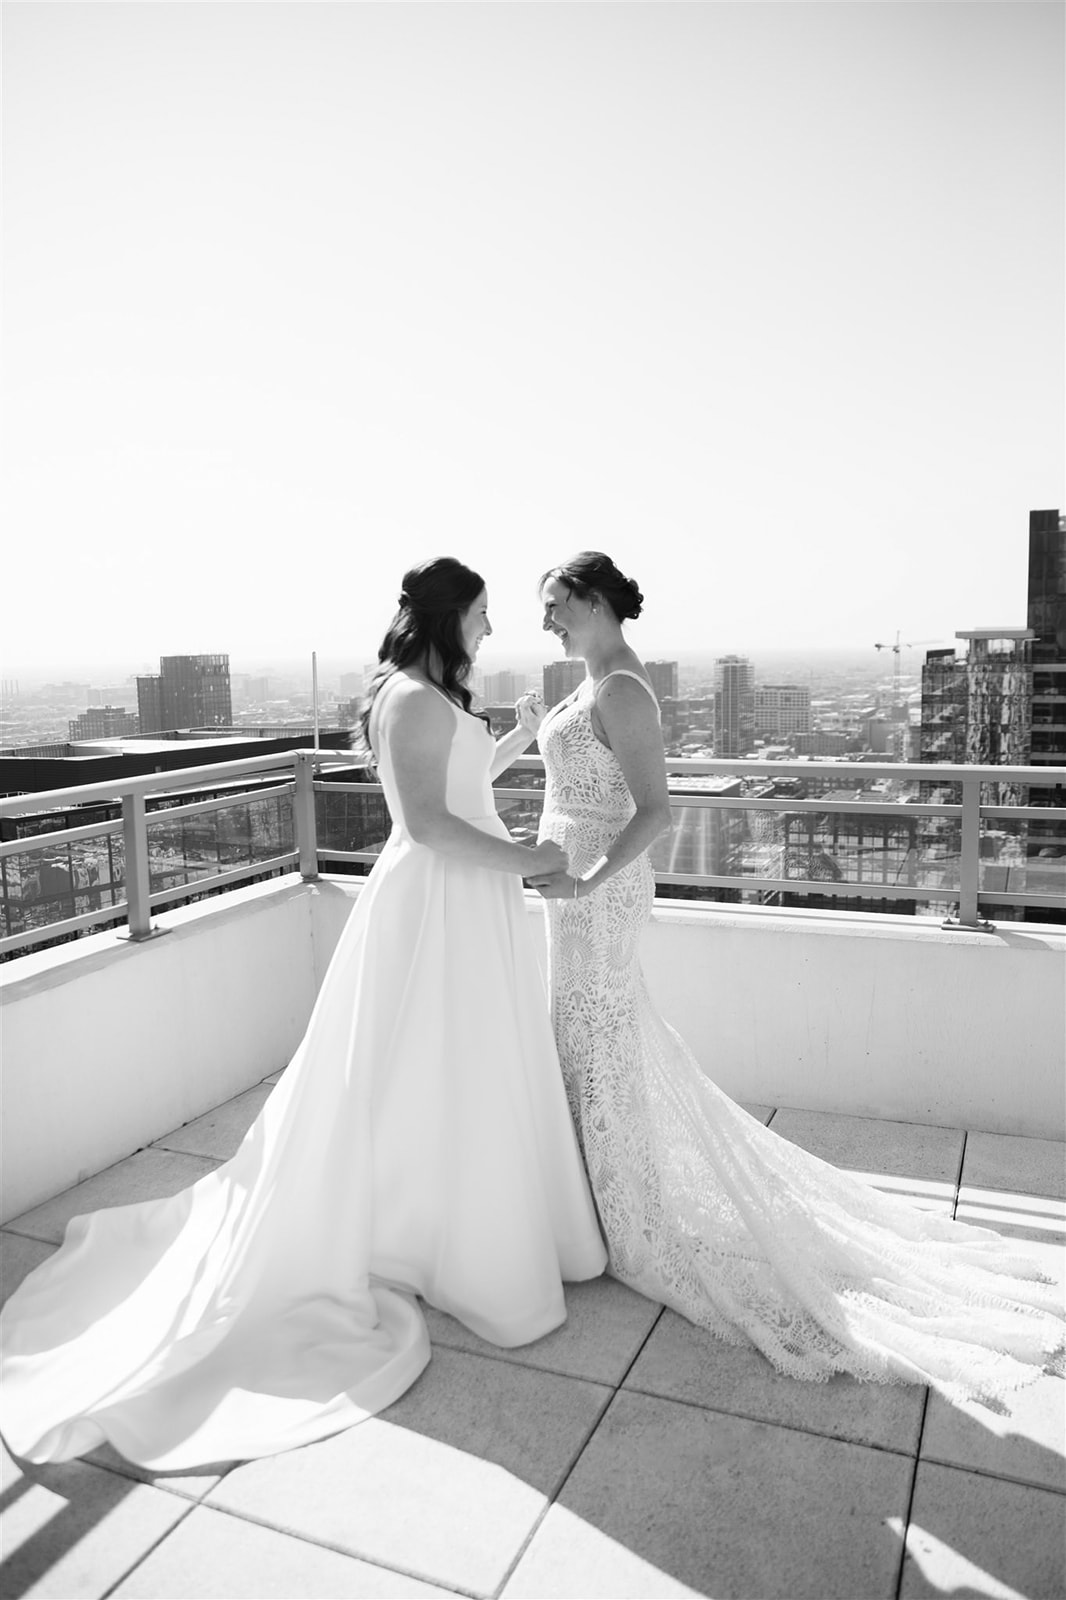 Two brides sharing a first look on Chicago rooftop and skyline backdrop, embracing in a moment of love and anticipation.